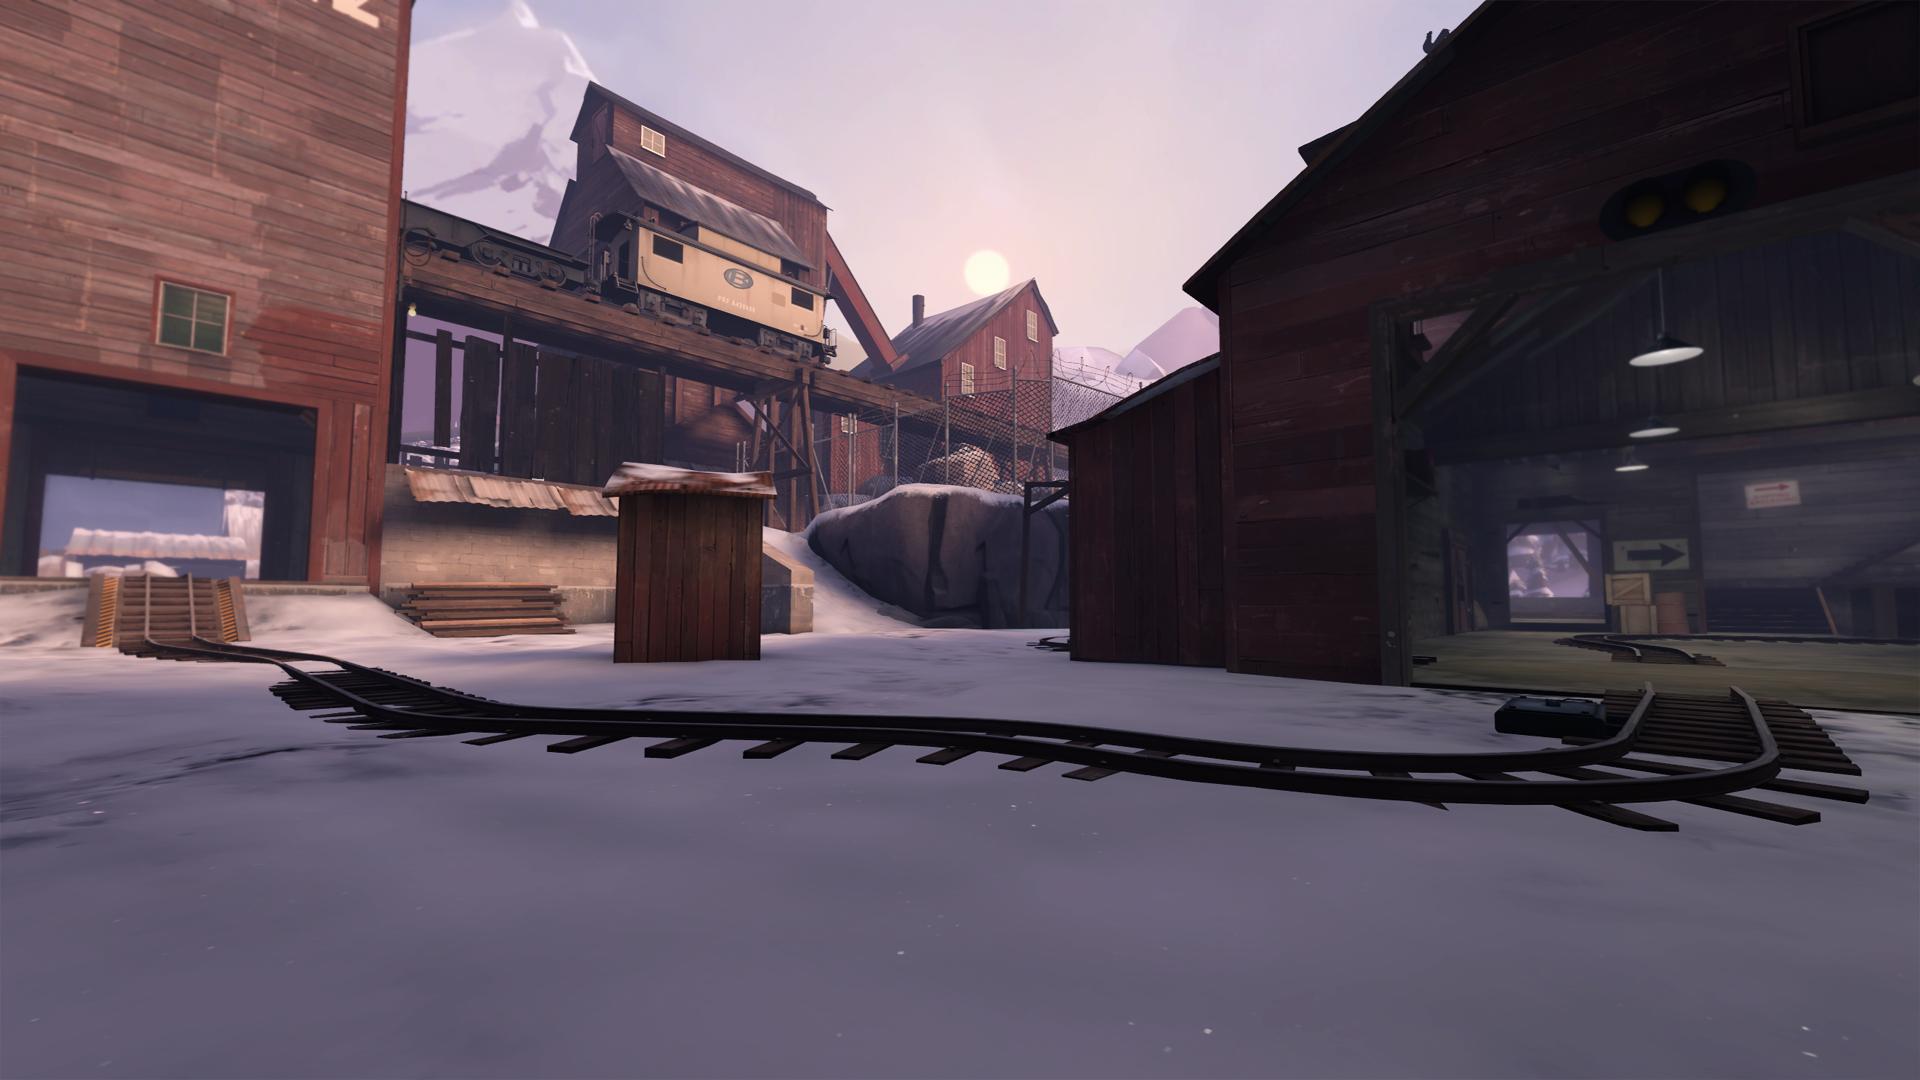 General 1920x1080 Team Fortress 2 snow barns video games Valve Corporation